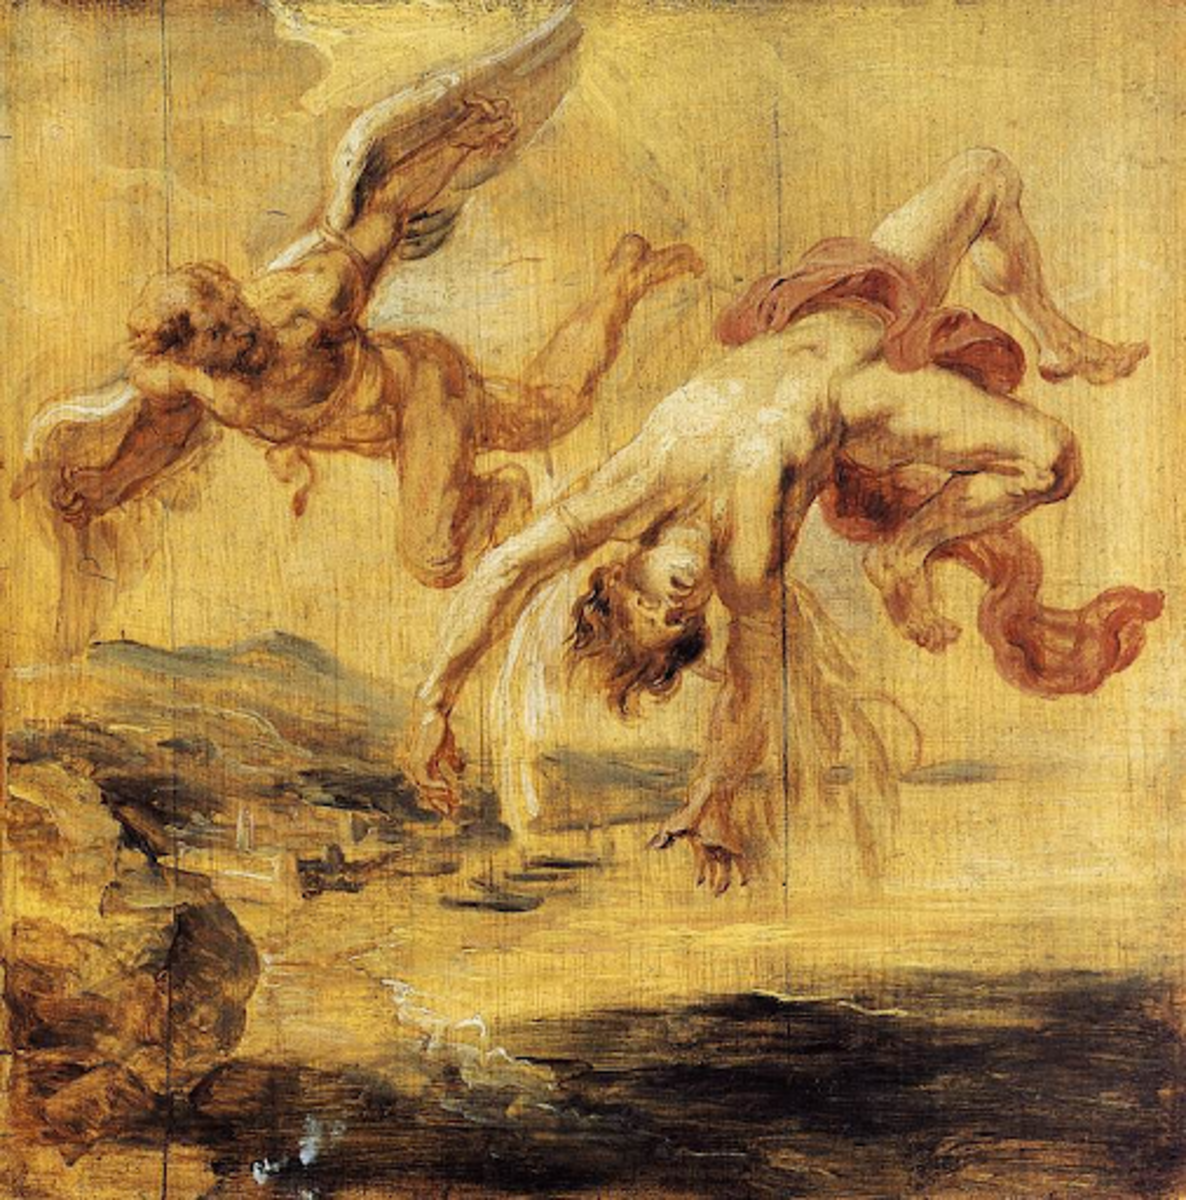 Jacob Peter Gowy‘s “The Flight of Icarus” (1635 to 1637).